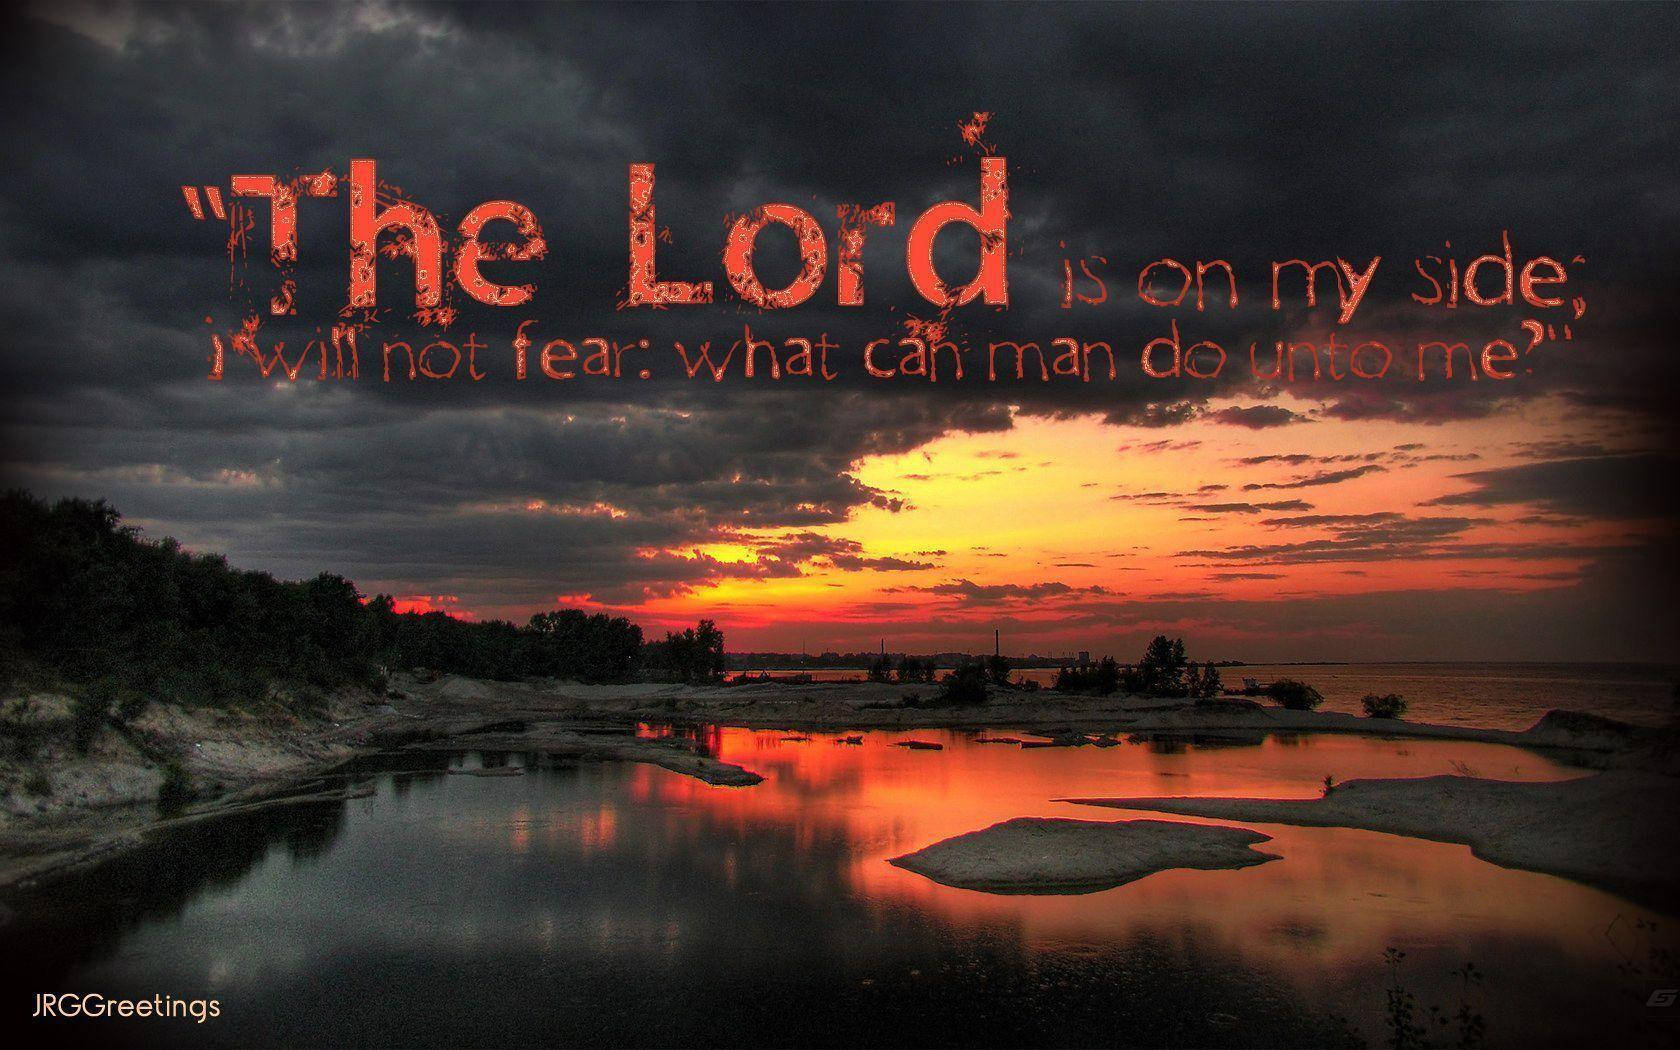 Sunset With Christian Verse Wallpaper